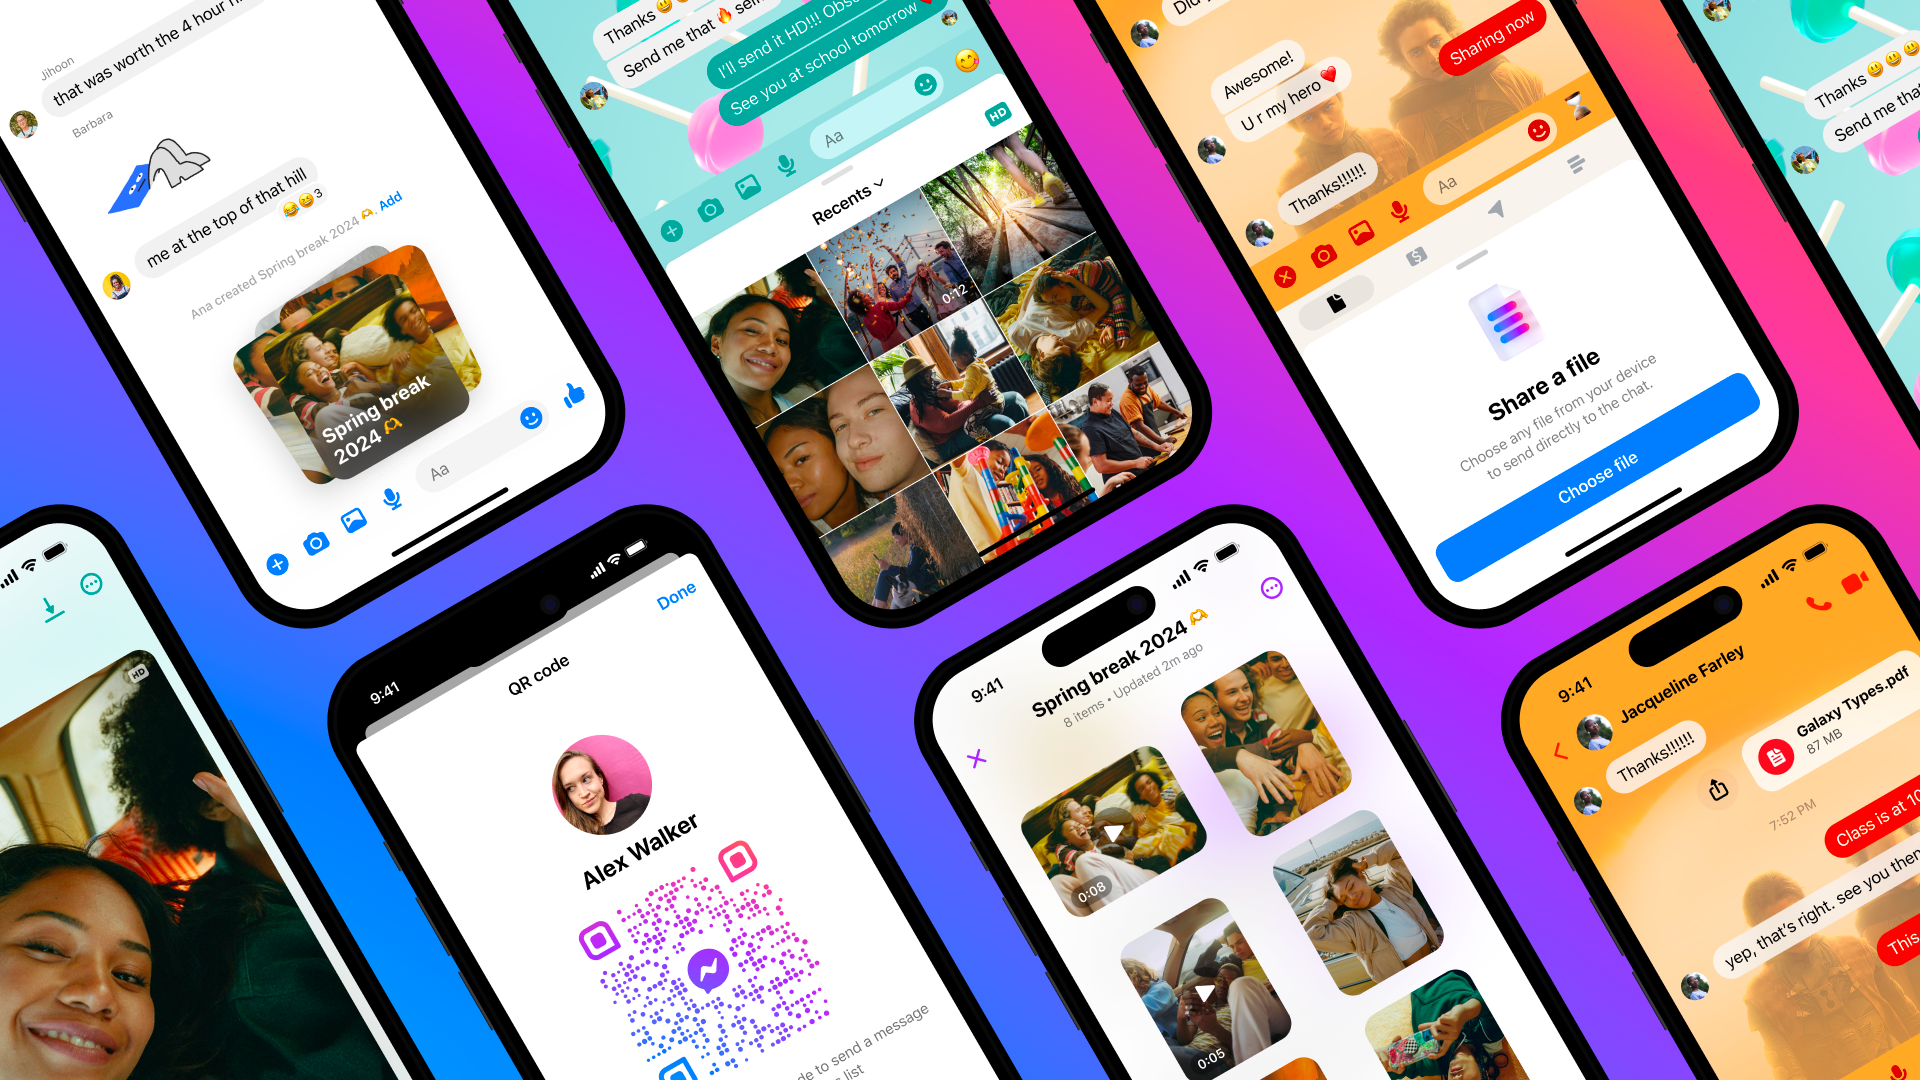 Facebook Messenger Unveils New Ways to Share and Connect